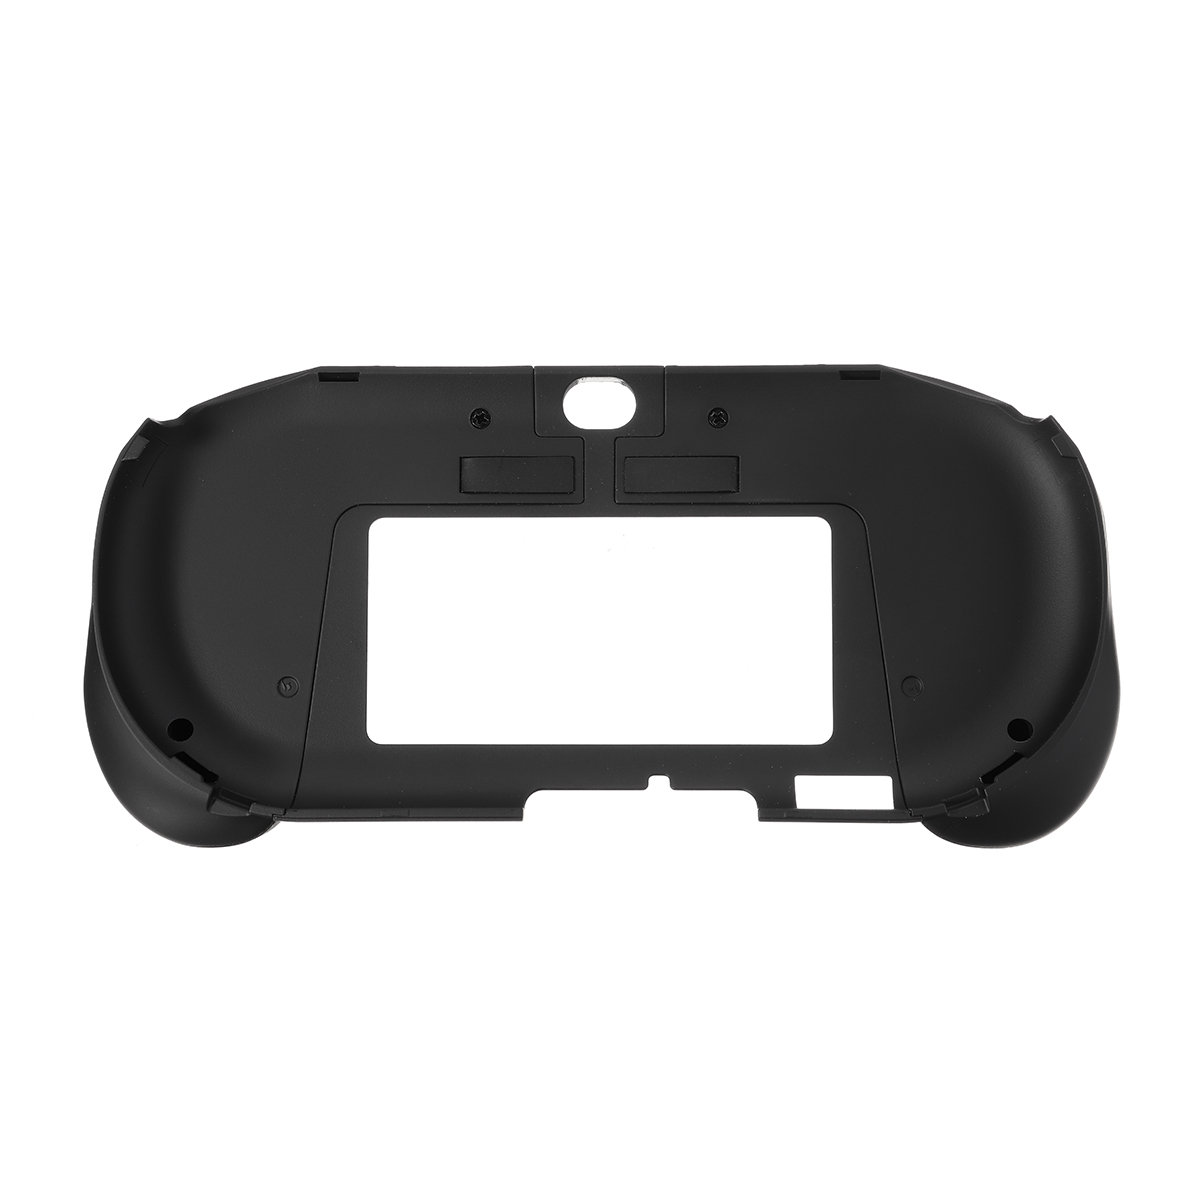 L2 R2 Trigger Grips Handle Shell Protective Case for Sony PlayStation PS Vita 2000 Game Console 19